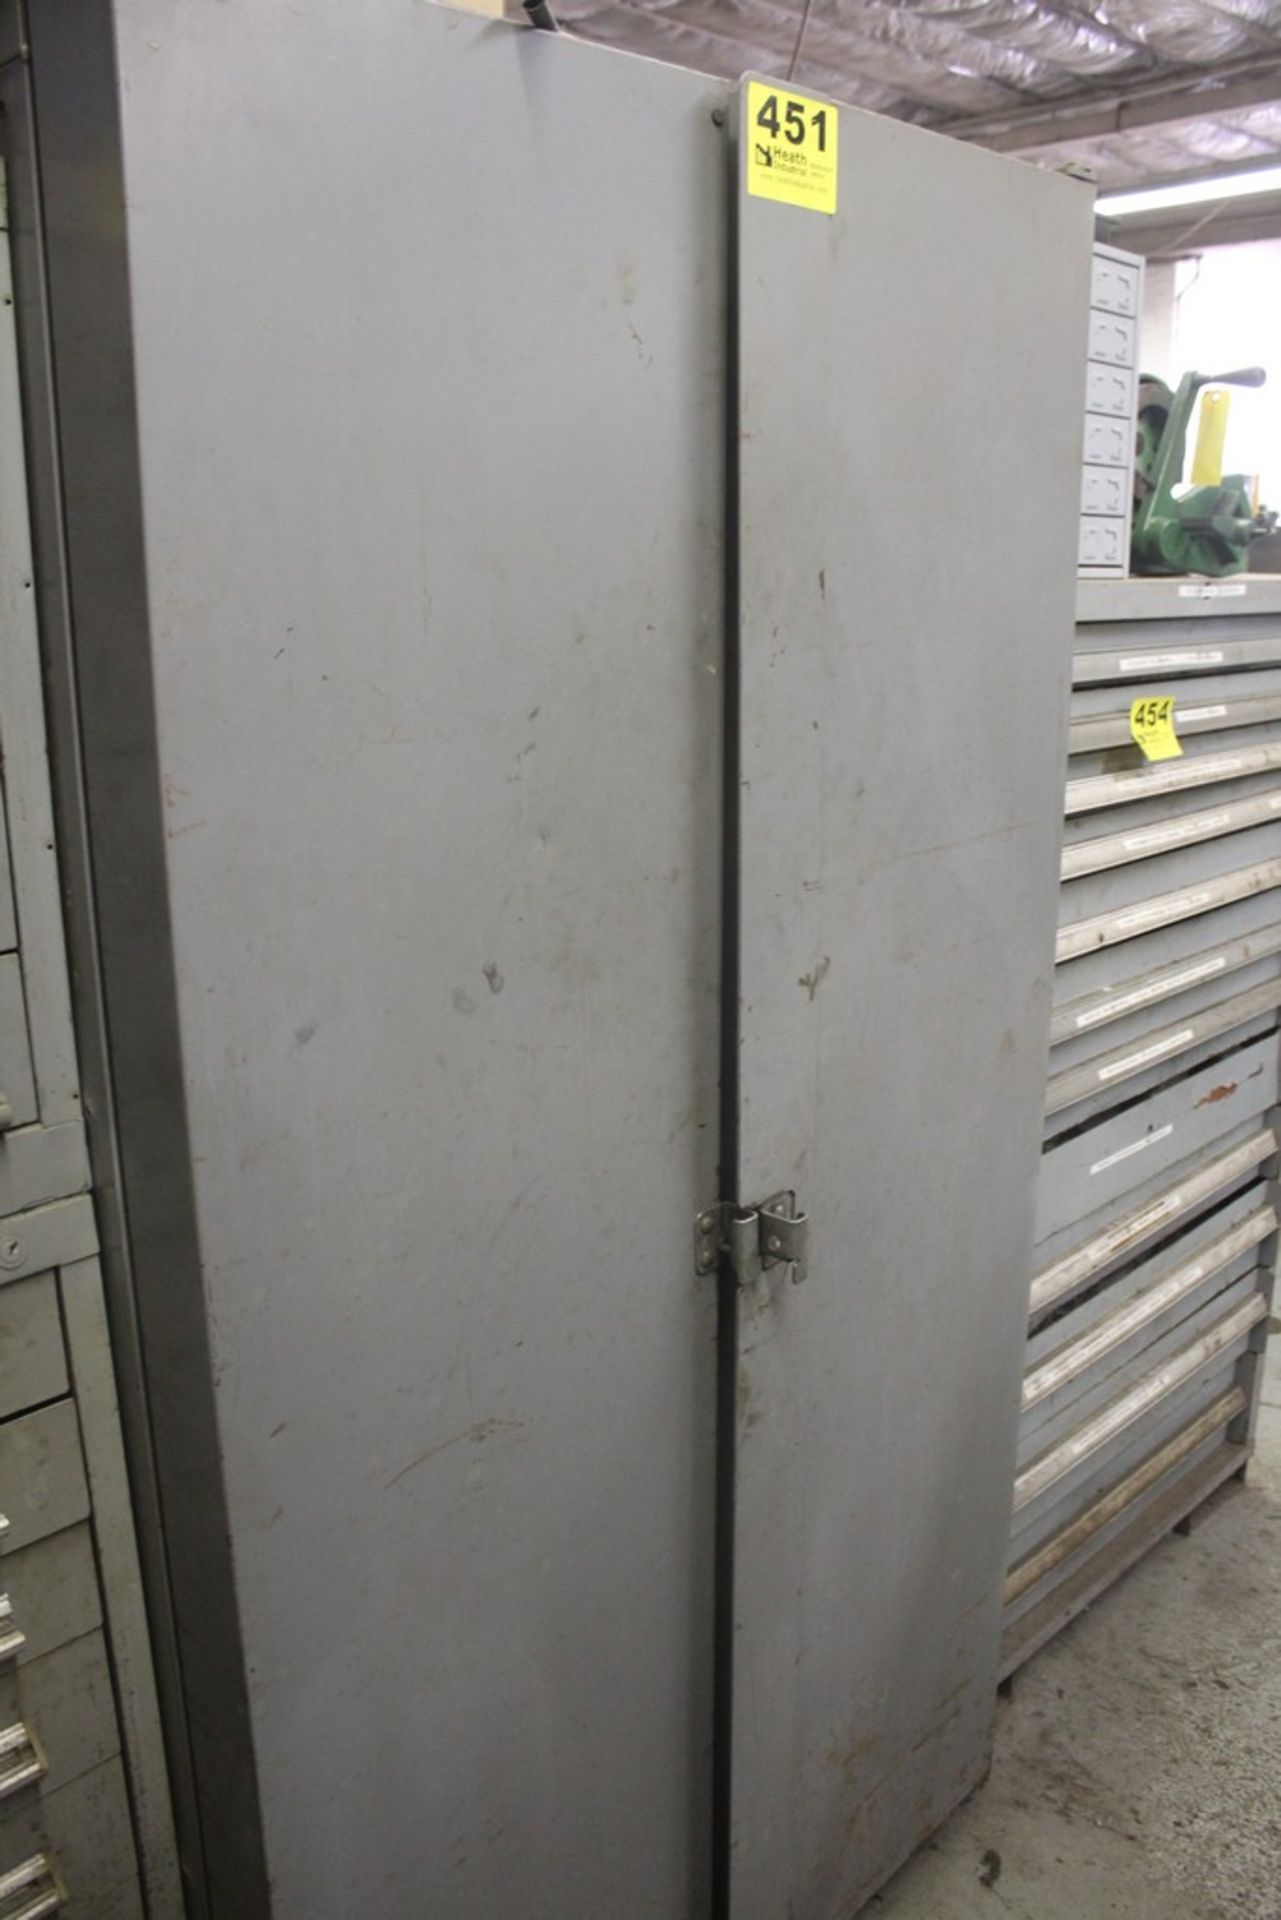 38" X 24" X 34" TWO DOOR STORAGE CABINET WITH REMAINING CNTENTS